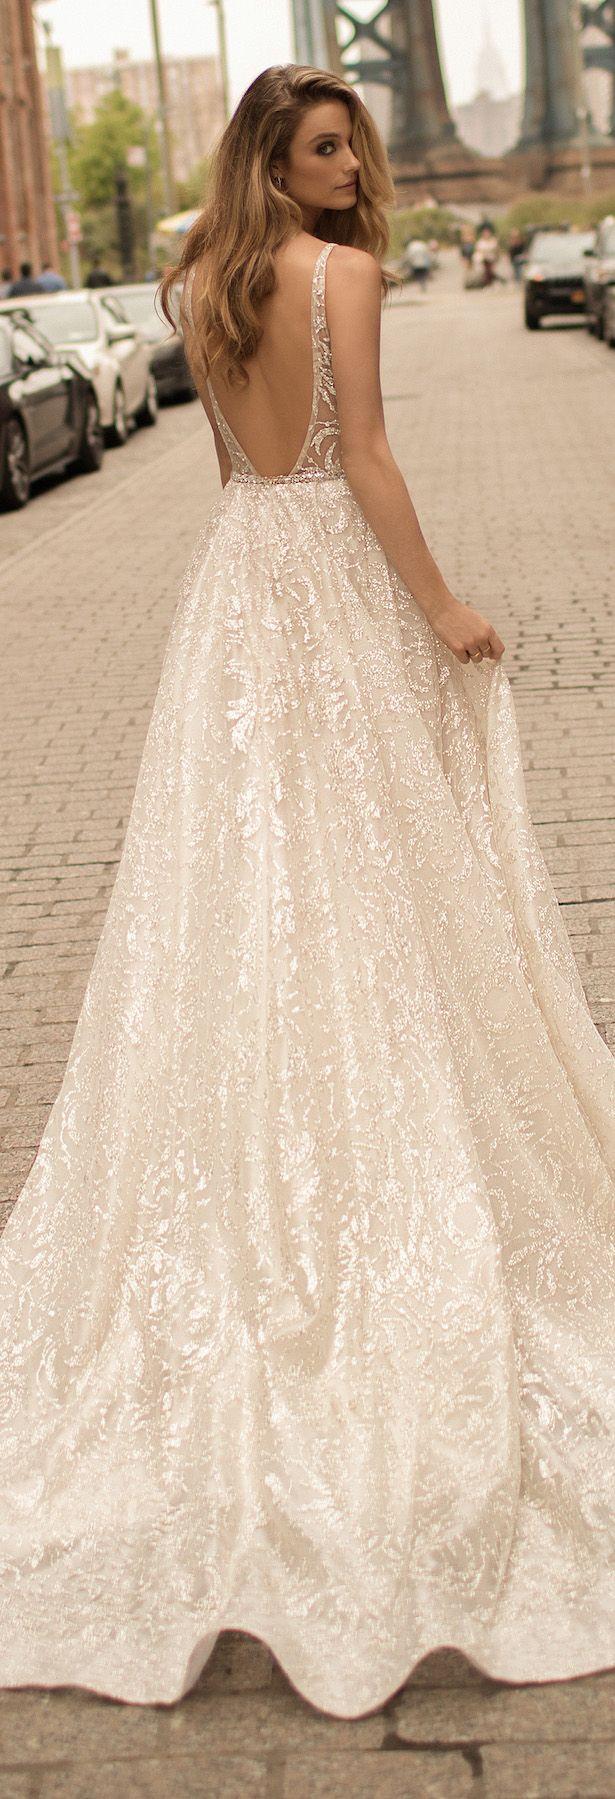 Mariage - 30 Vintage Wedding Dresses With Amazing Details